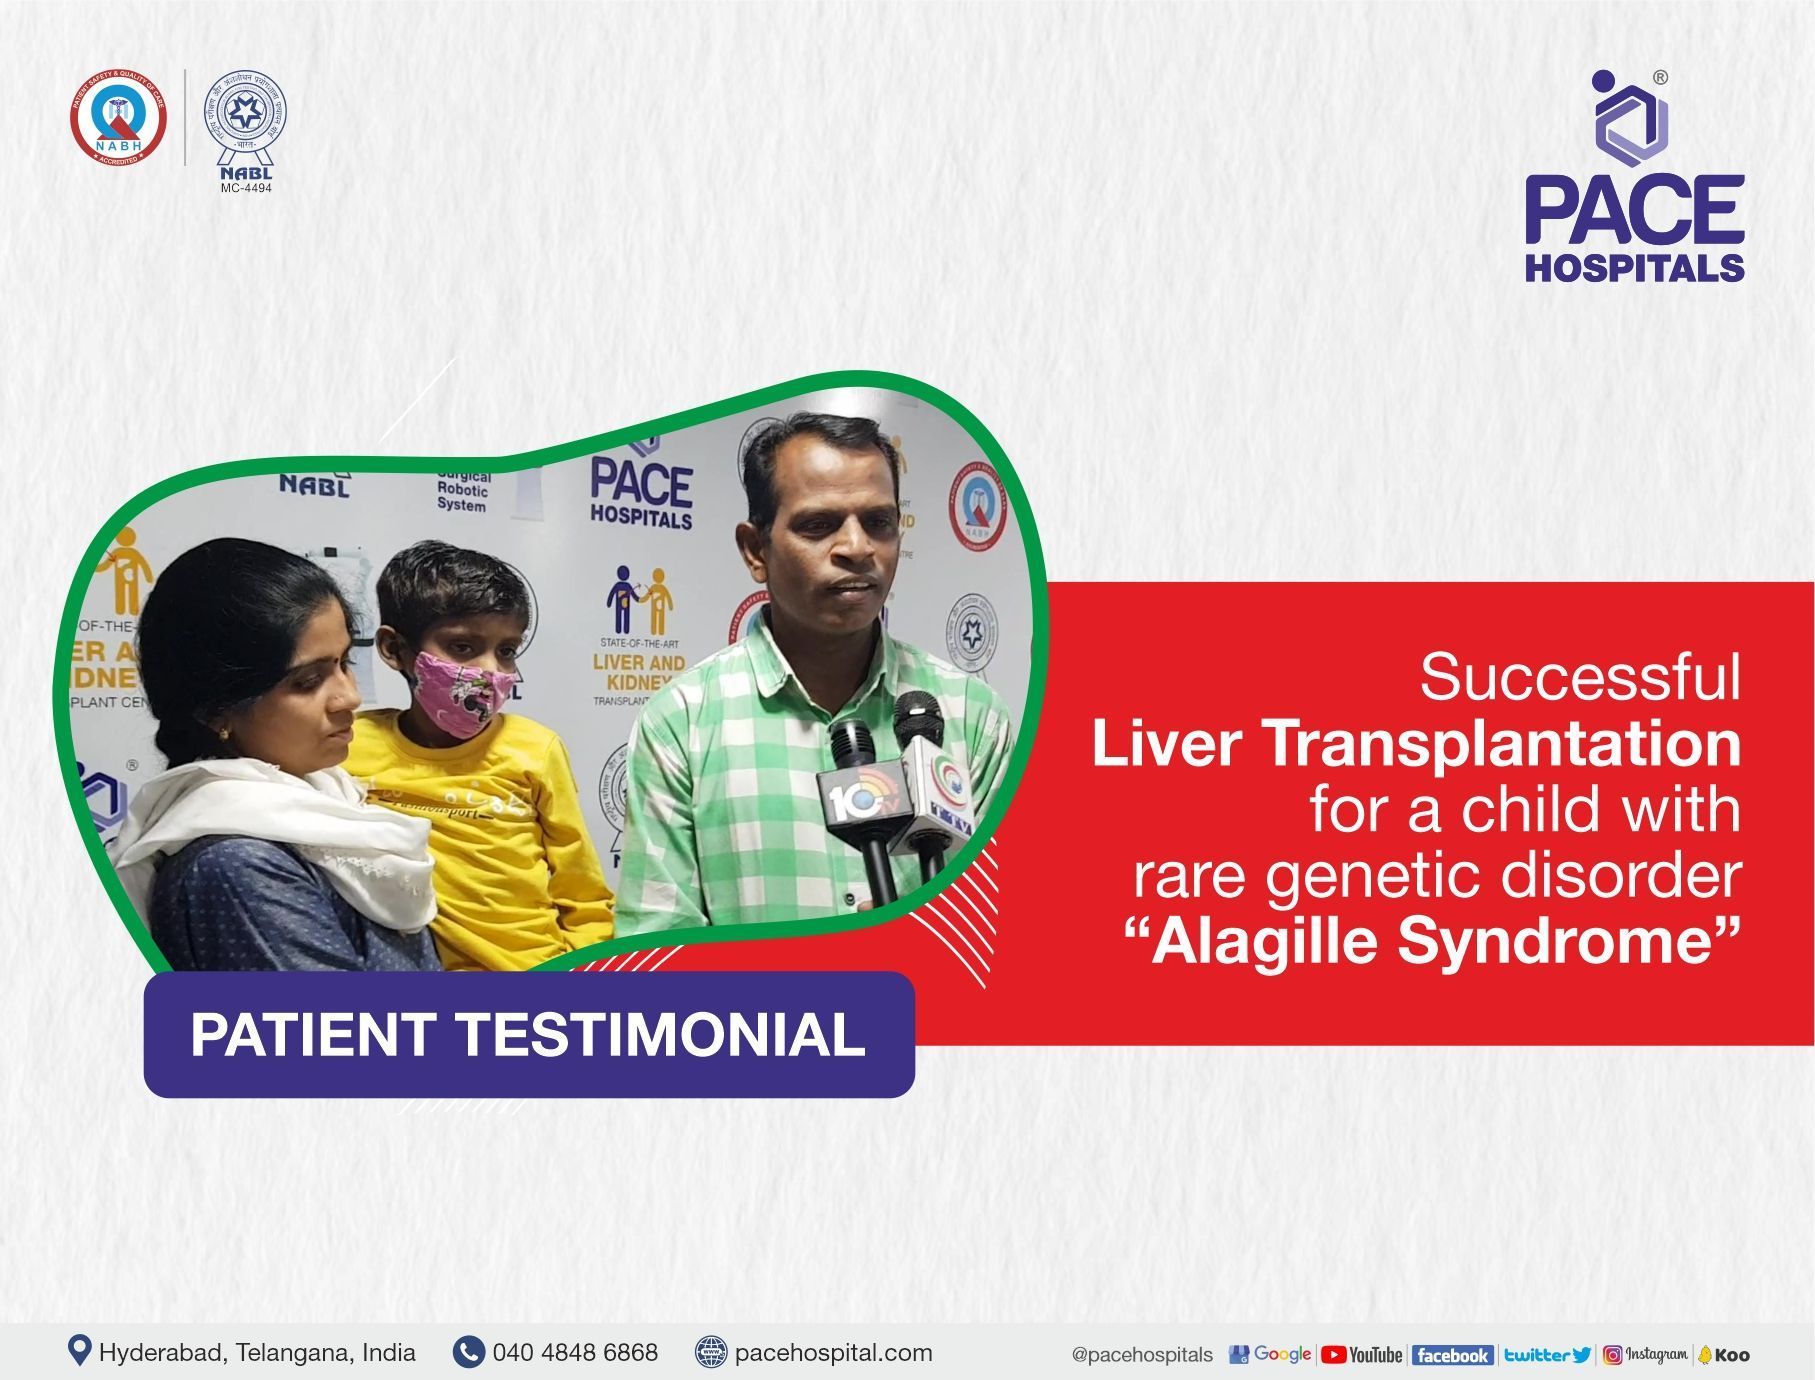 Paediatric Liver Transplant for a child with Alagille Syndrome